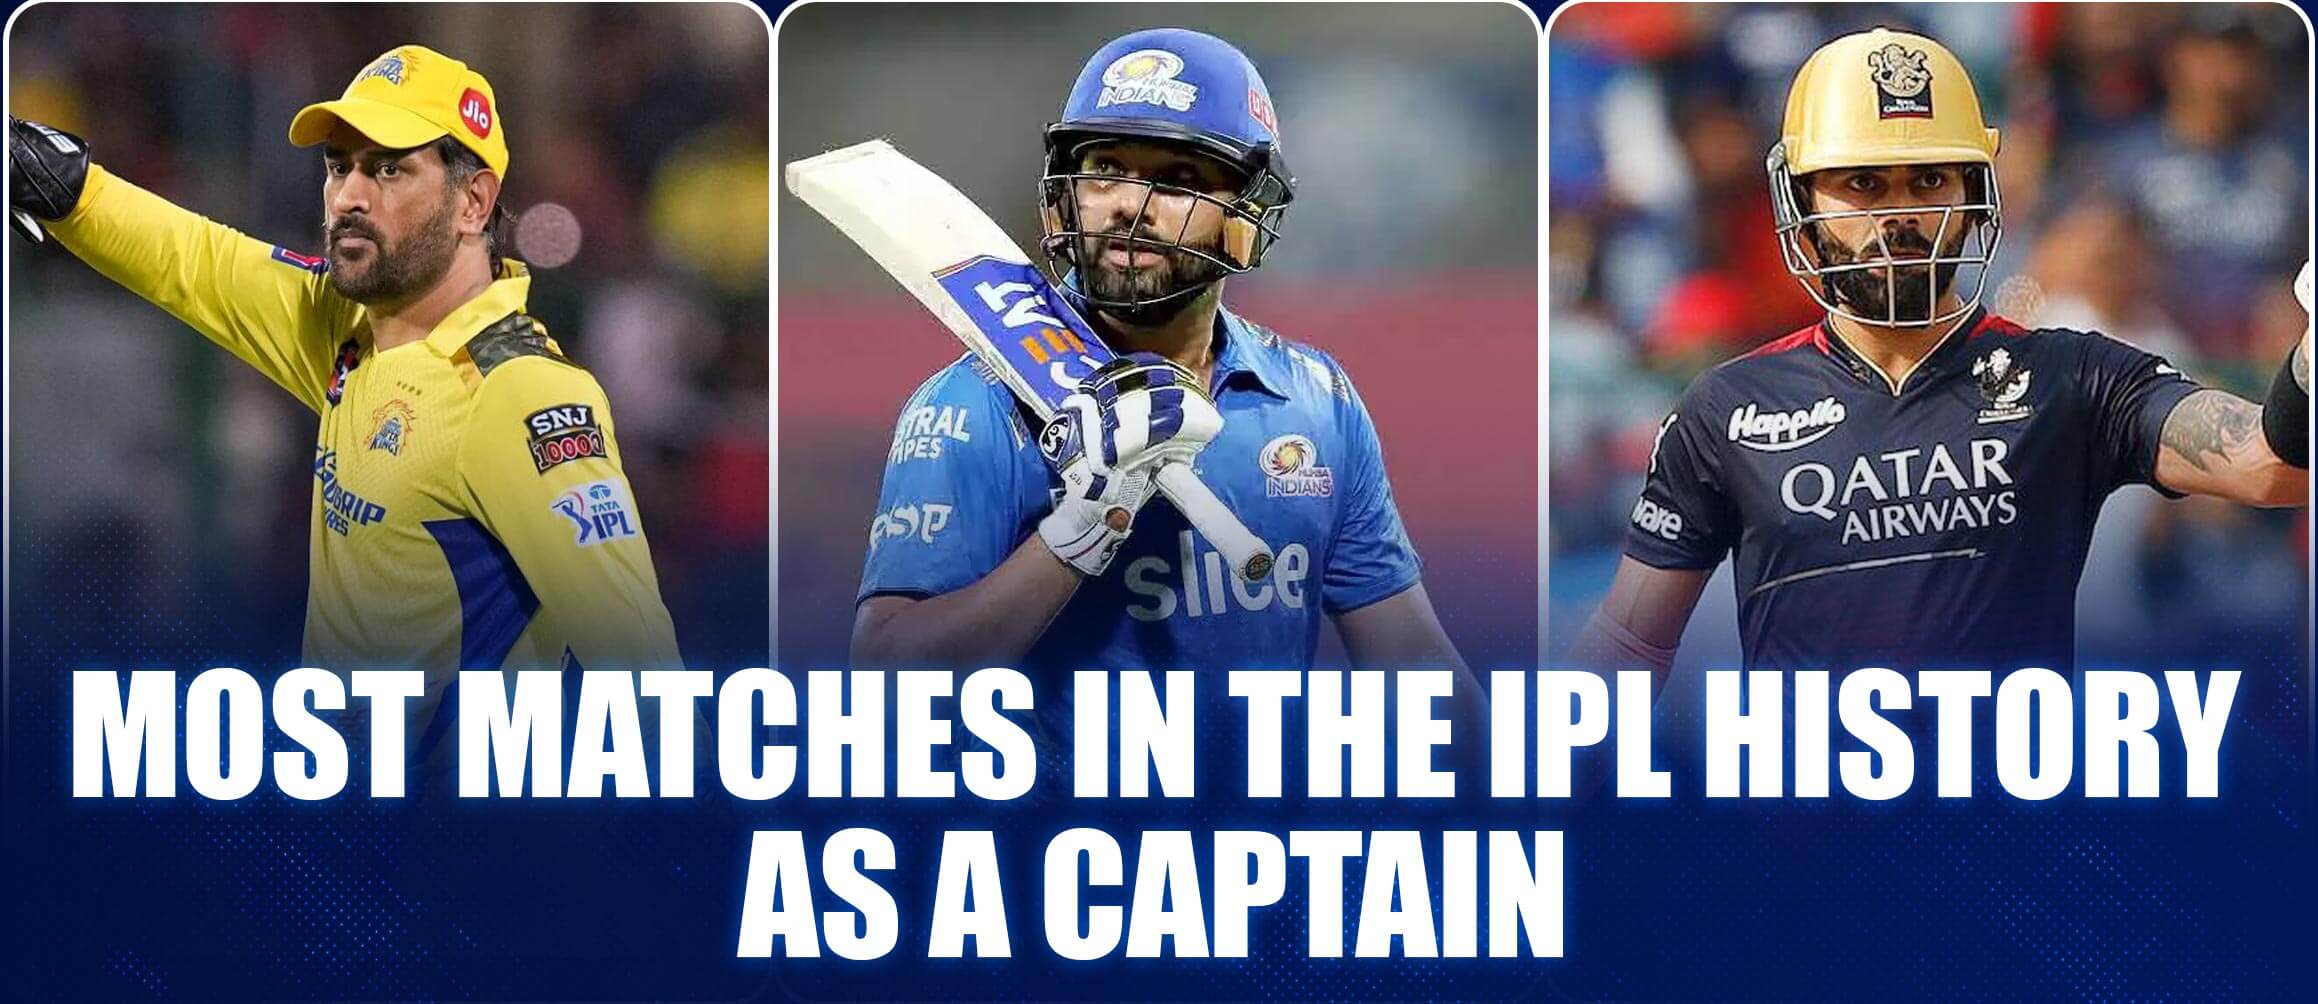 Most Matches in The IPL History as a Captain